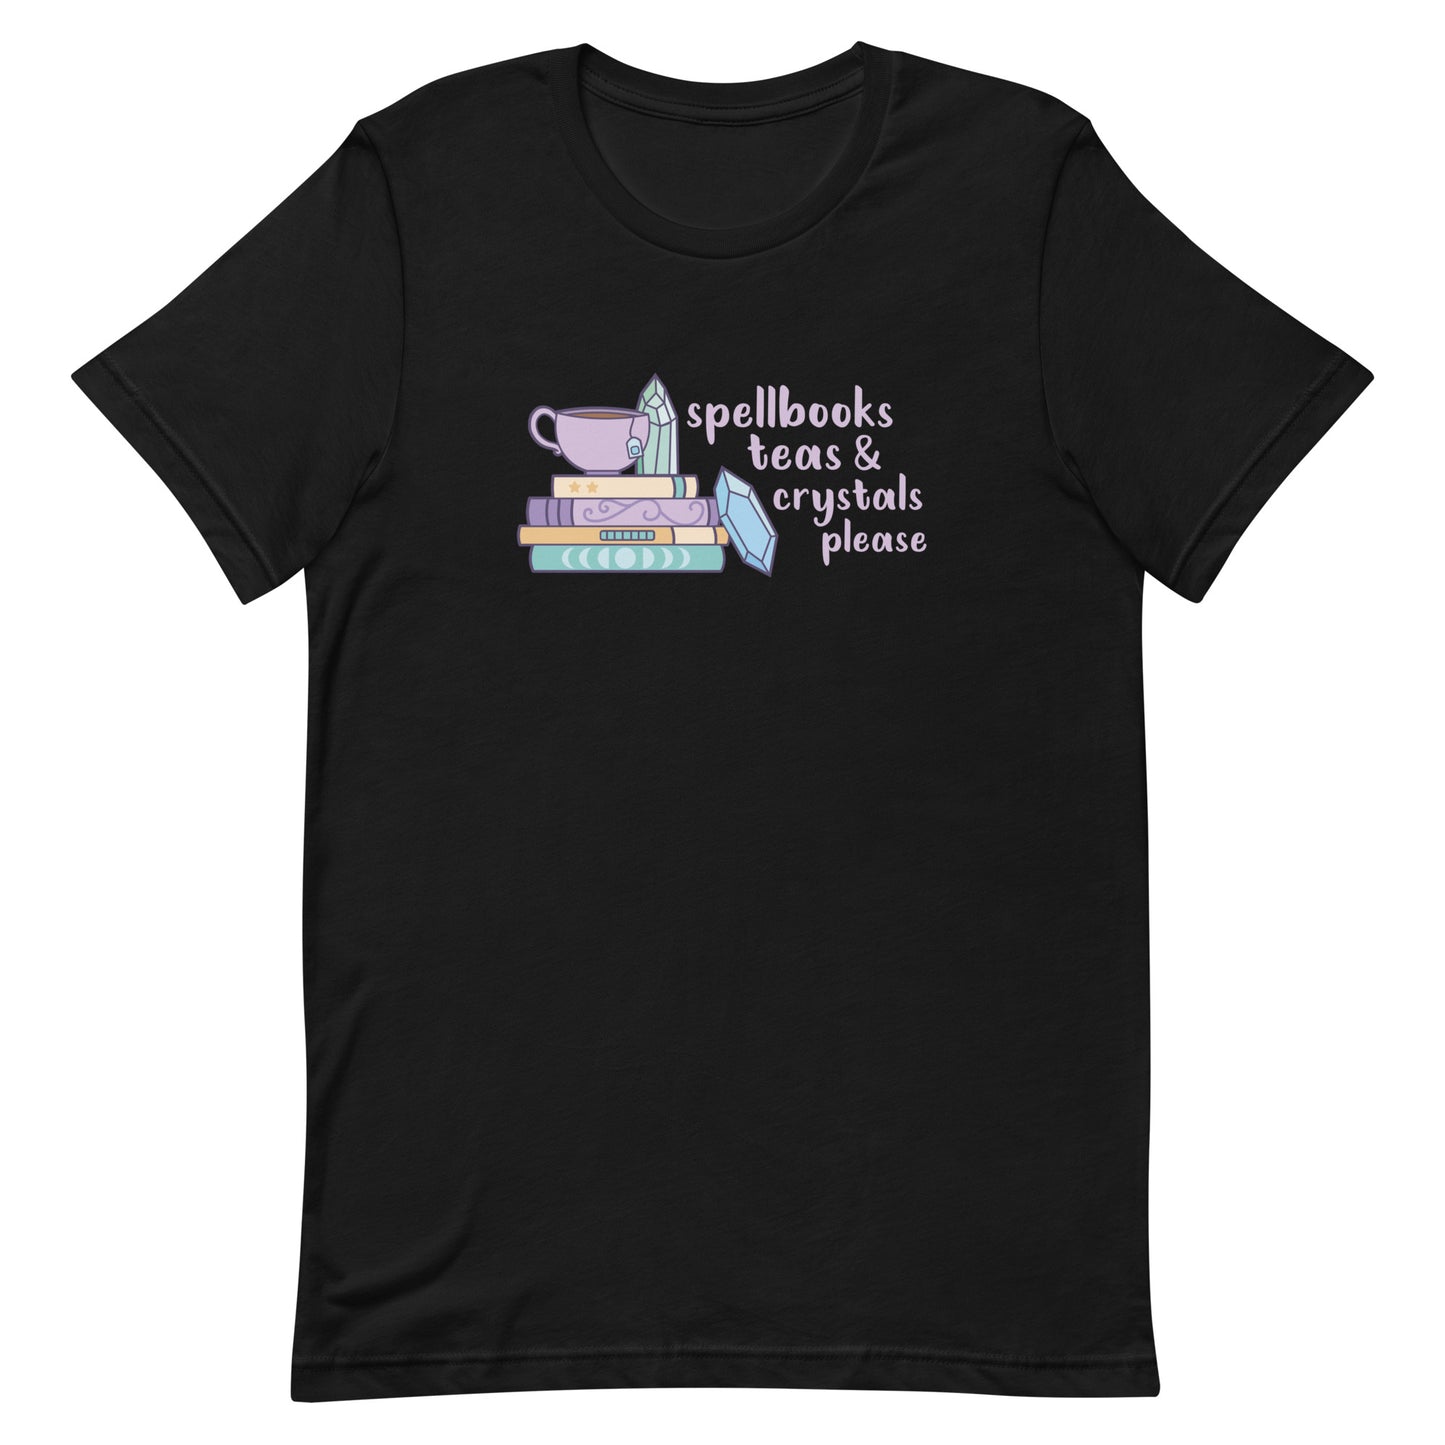 A black t-shirt featuring an illustration of a stack of spellbooks with a teacup resting on top. A few crystals are scattered around the books. Text alongside the illustration reads "Spellbooks, teas & crystals please"